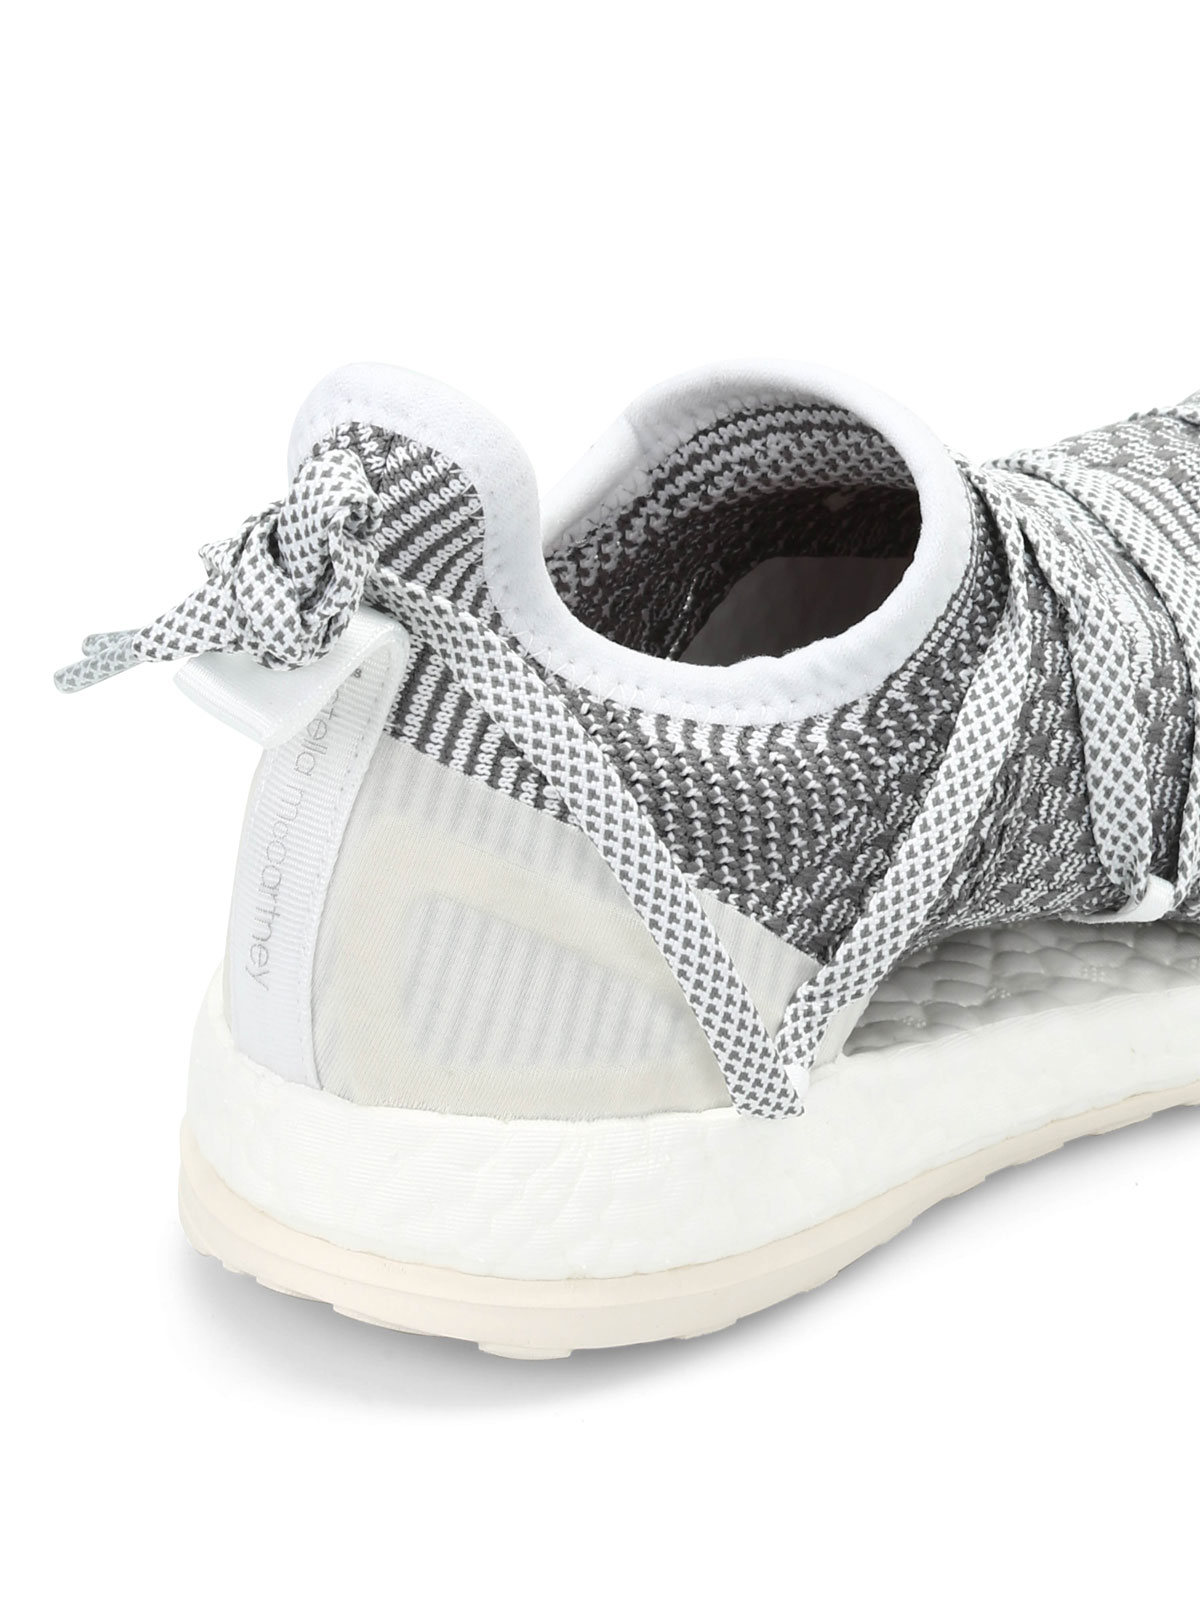 Trainers Adidas by McCartney - Pure Boost X sneakers - AF6431WHITEDKBLUEWHTVAP